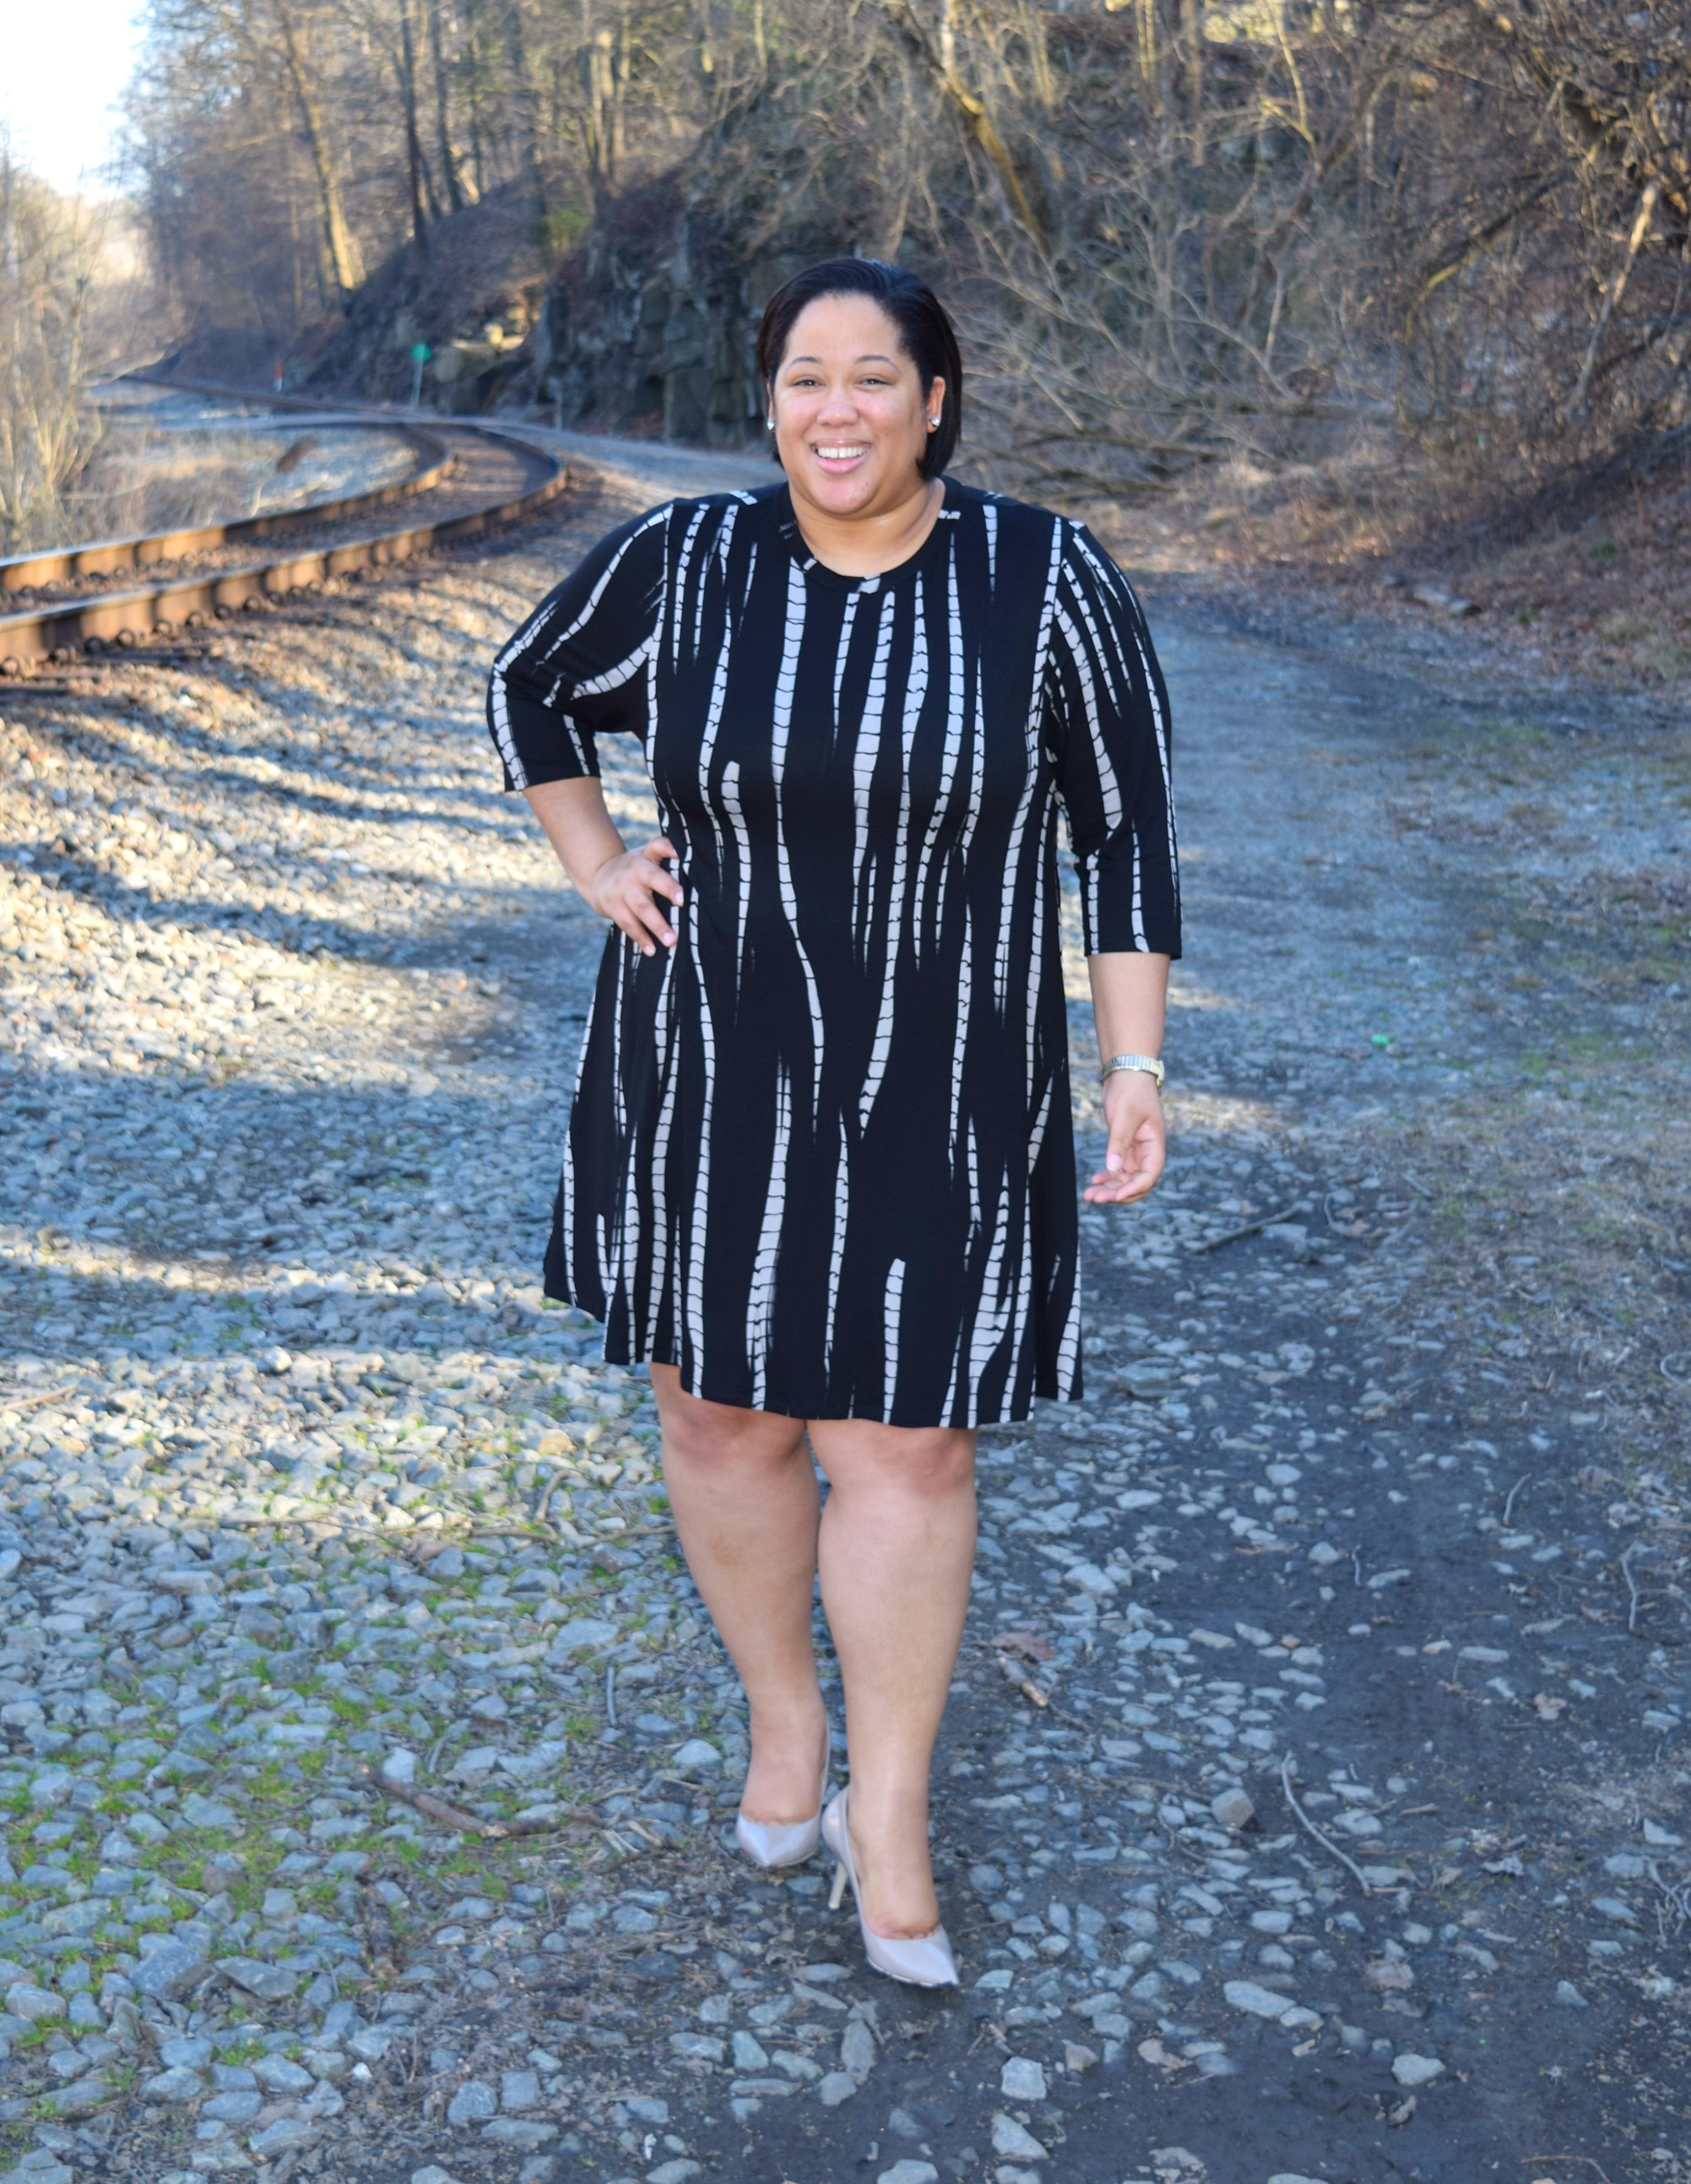 Plus Size Fashion - Dressing for Your Body Type